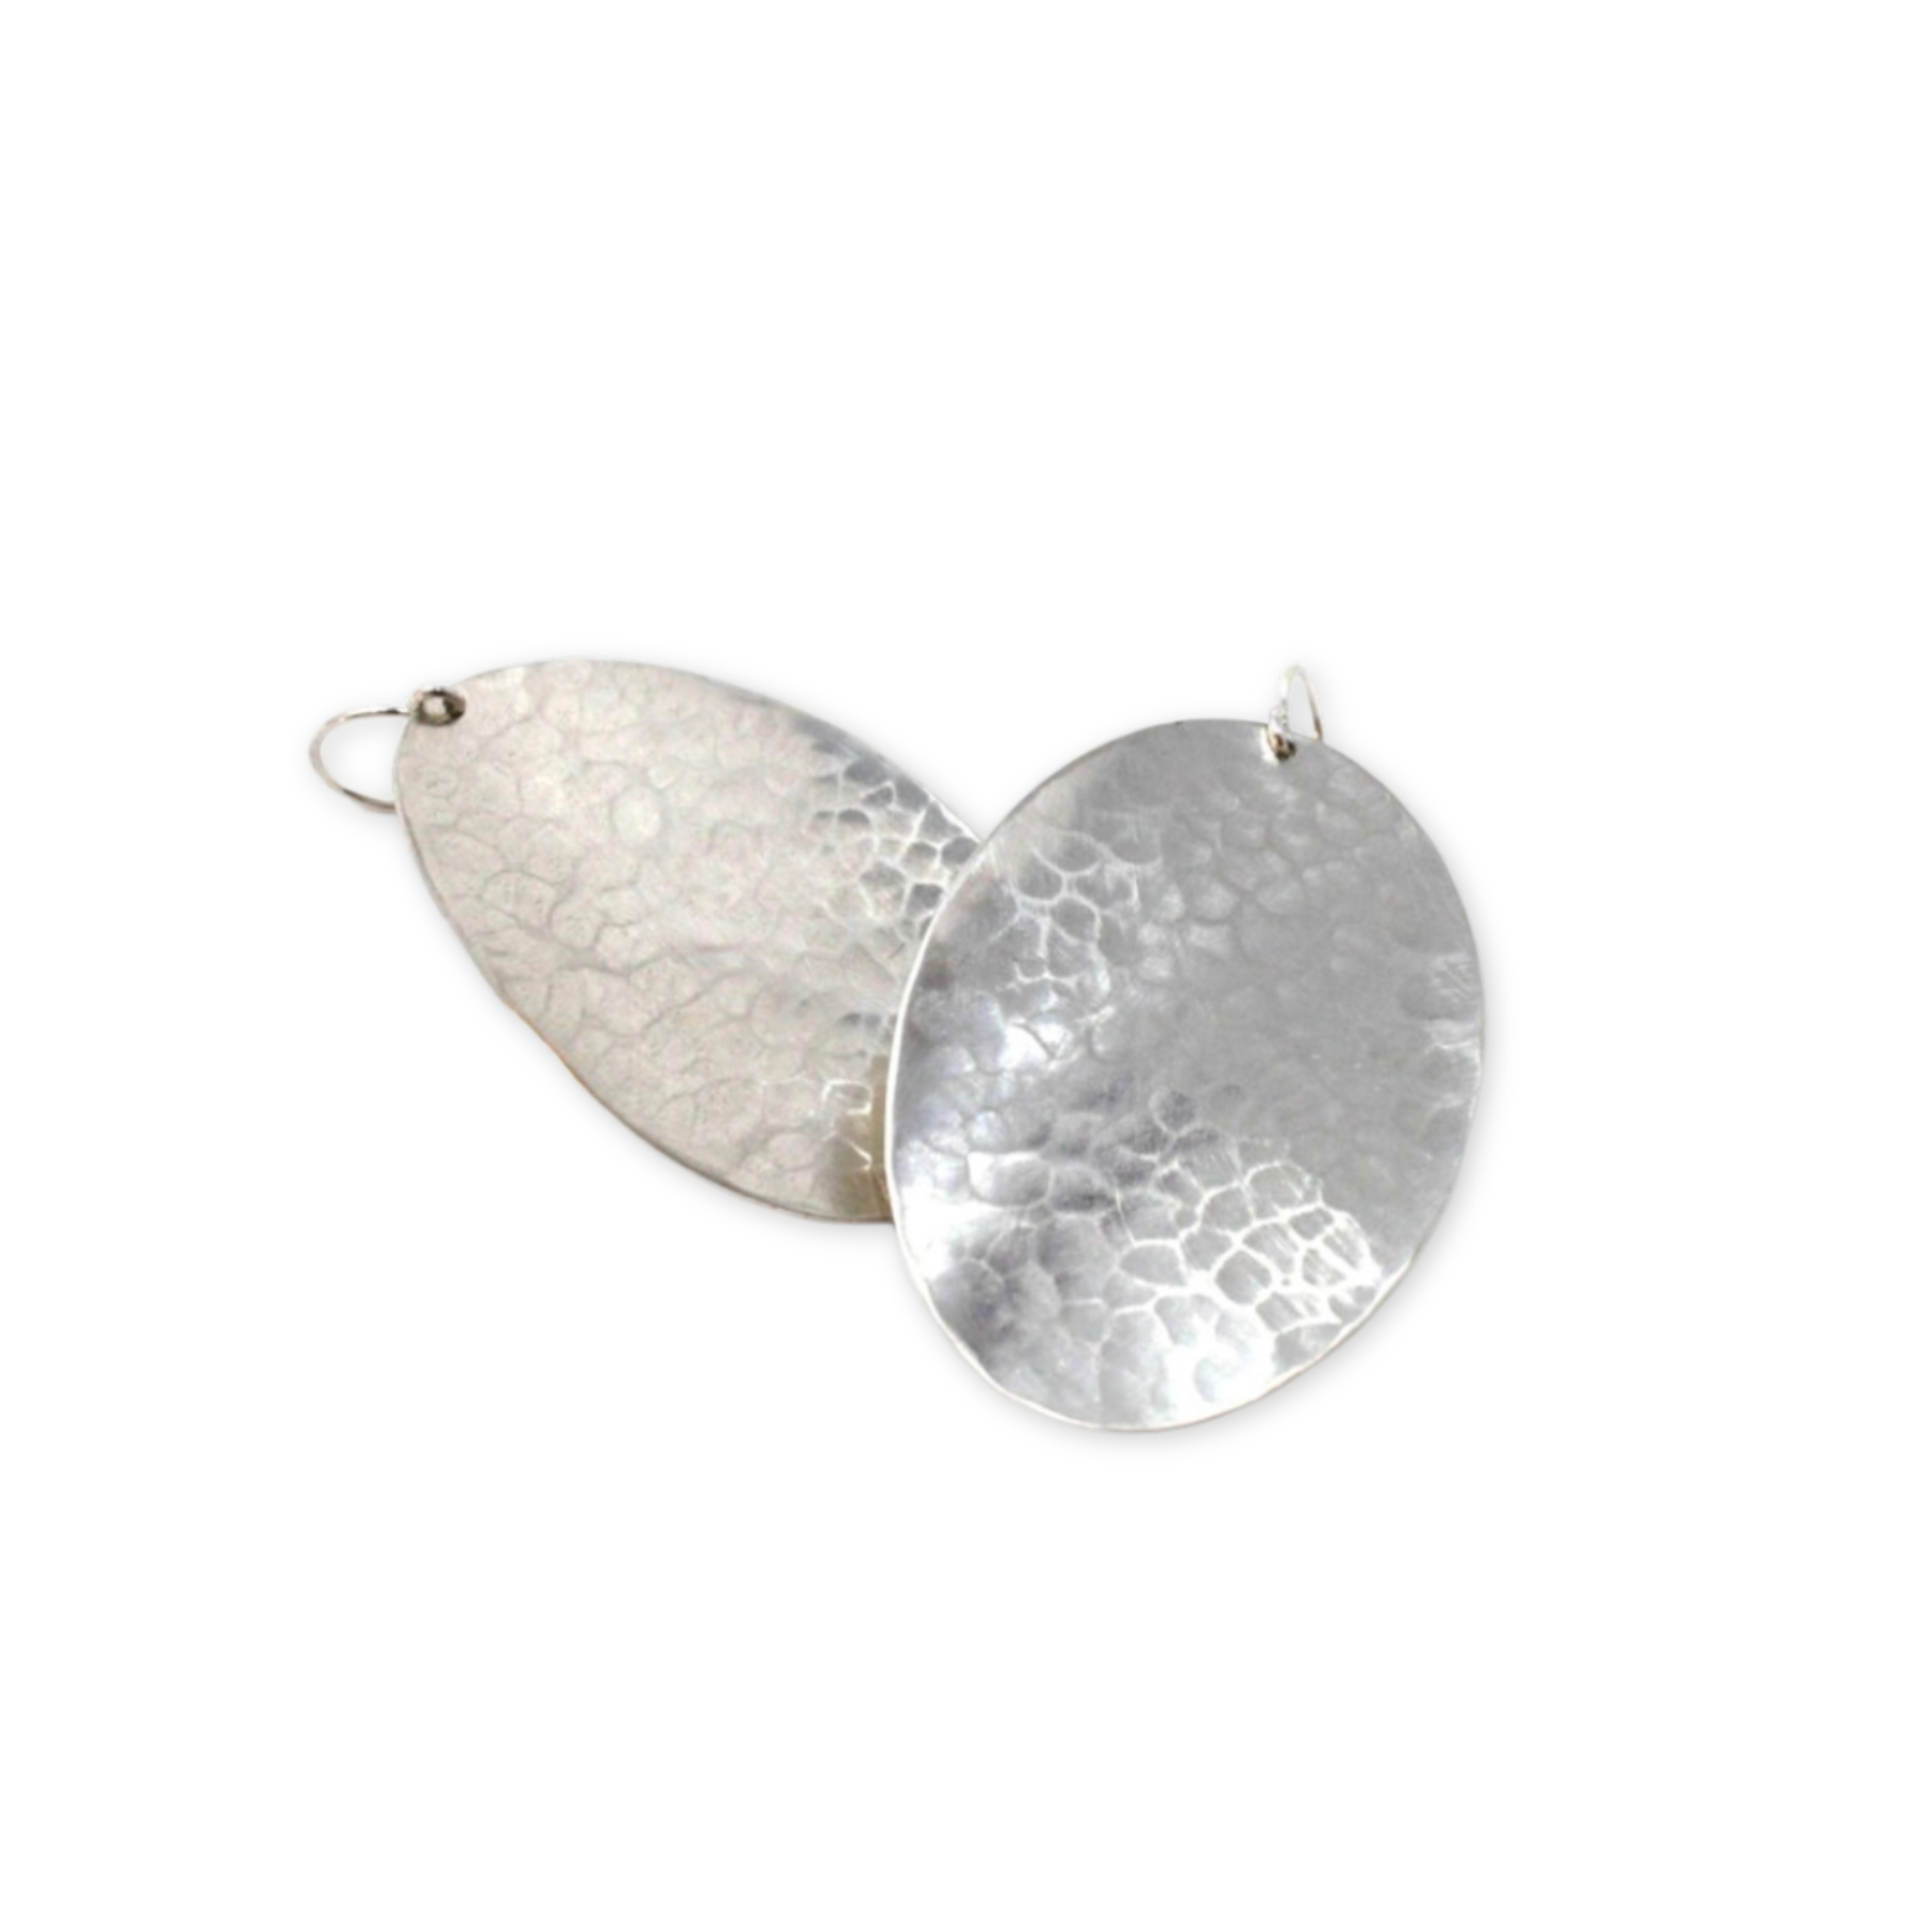 large hammered oval shaped pendants hanging on ear wire